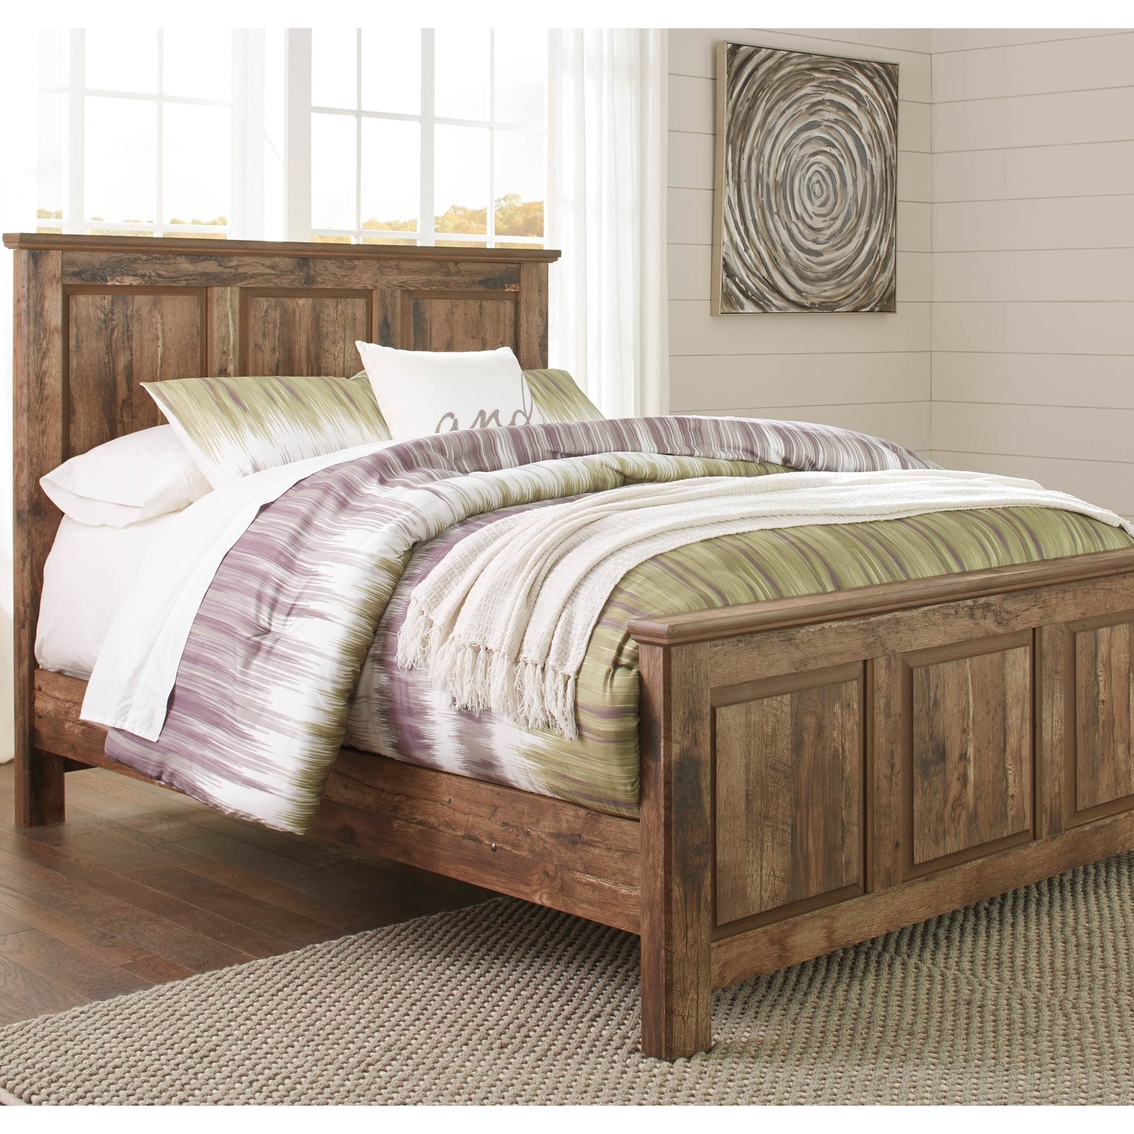 Signature Design by Ashley Blaneville Panel Bed - Image 2 of 4